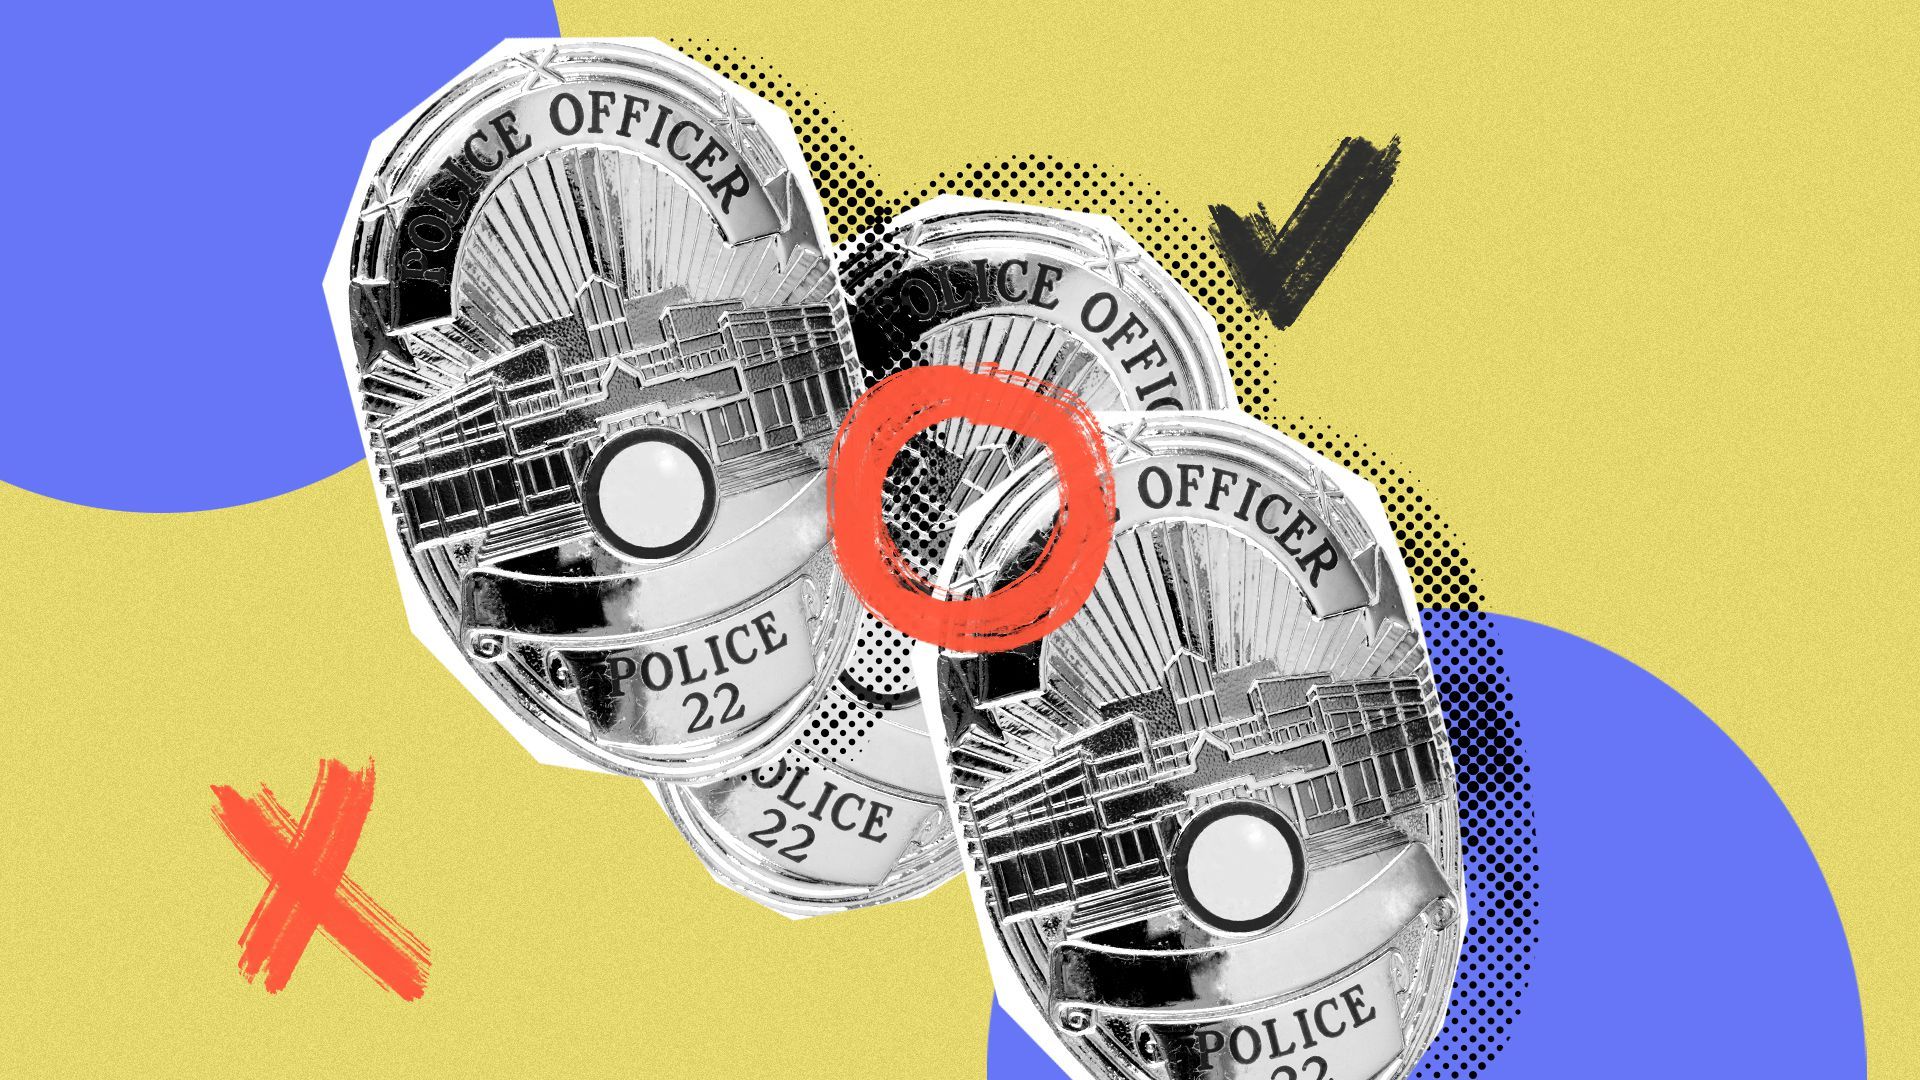 Illustration of three overlapping police badges, oriented differently, with marks around the badges